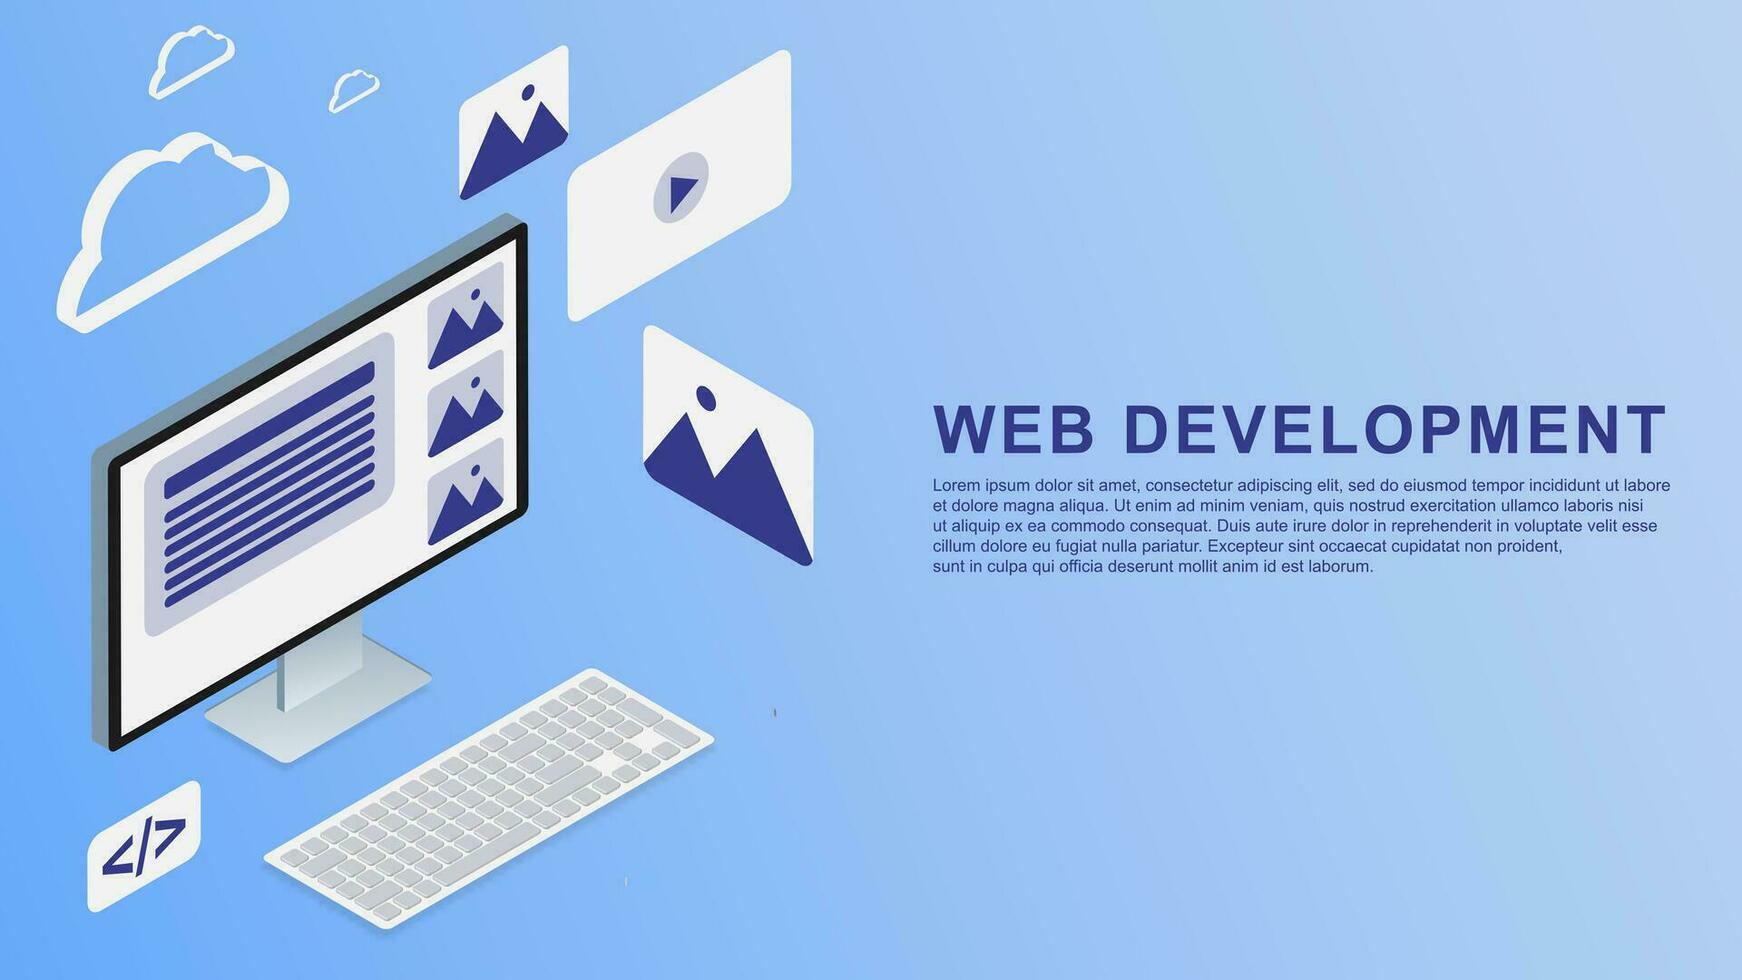 Web development isometric design. Computer with visual screen concept background. Vector illustration.